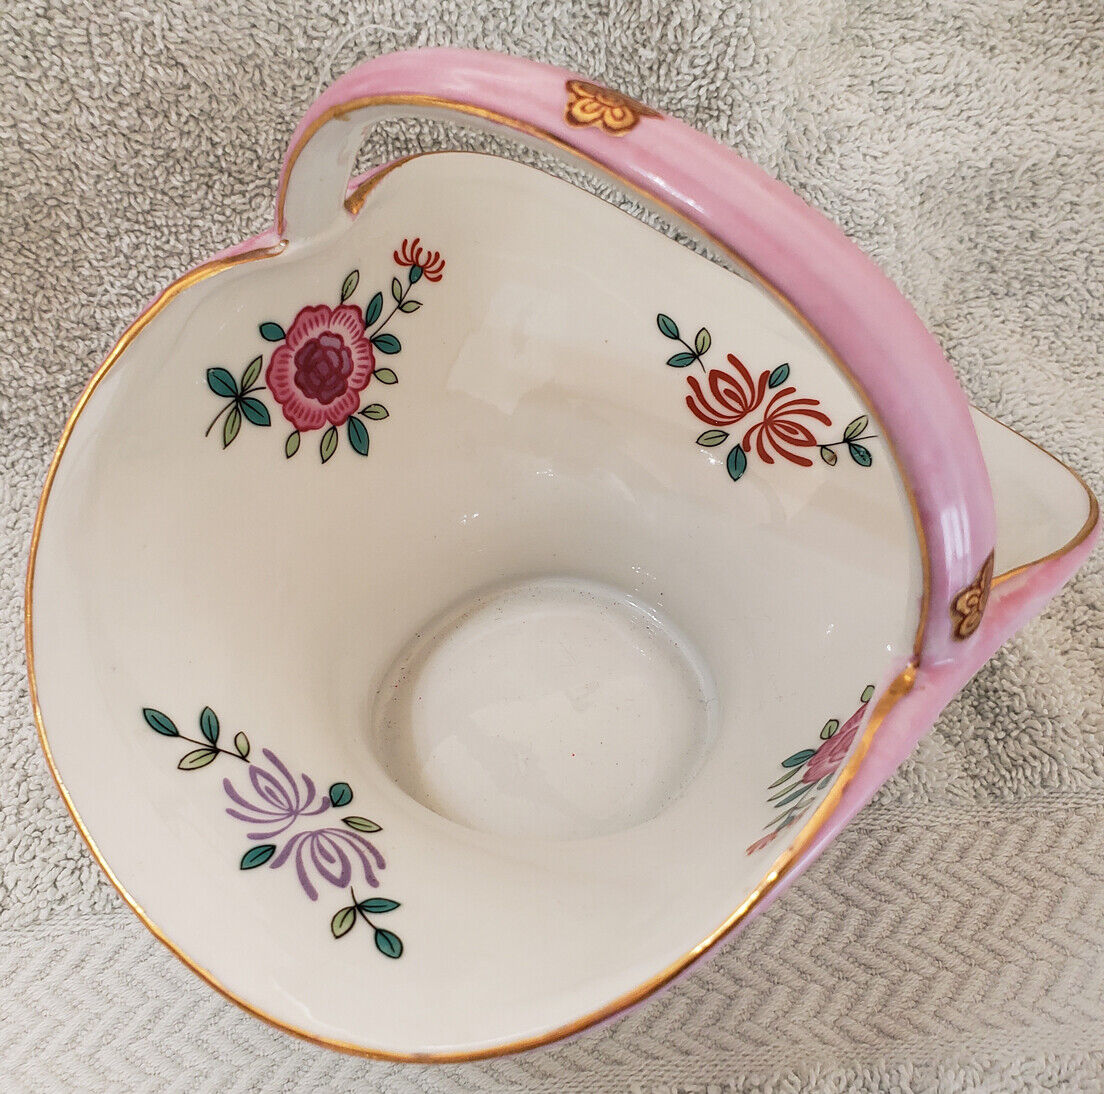 PORCELAIN BASKET WITH HANDPAINTED AND DECAL ADORNMENT